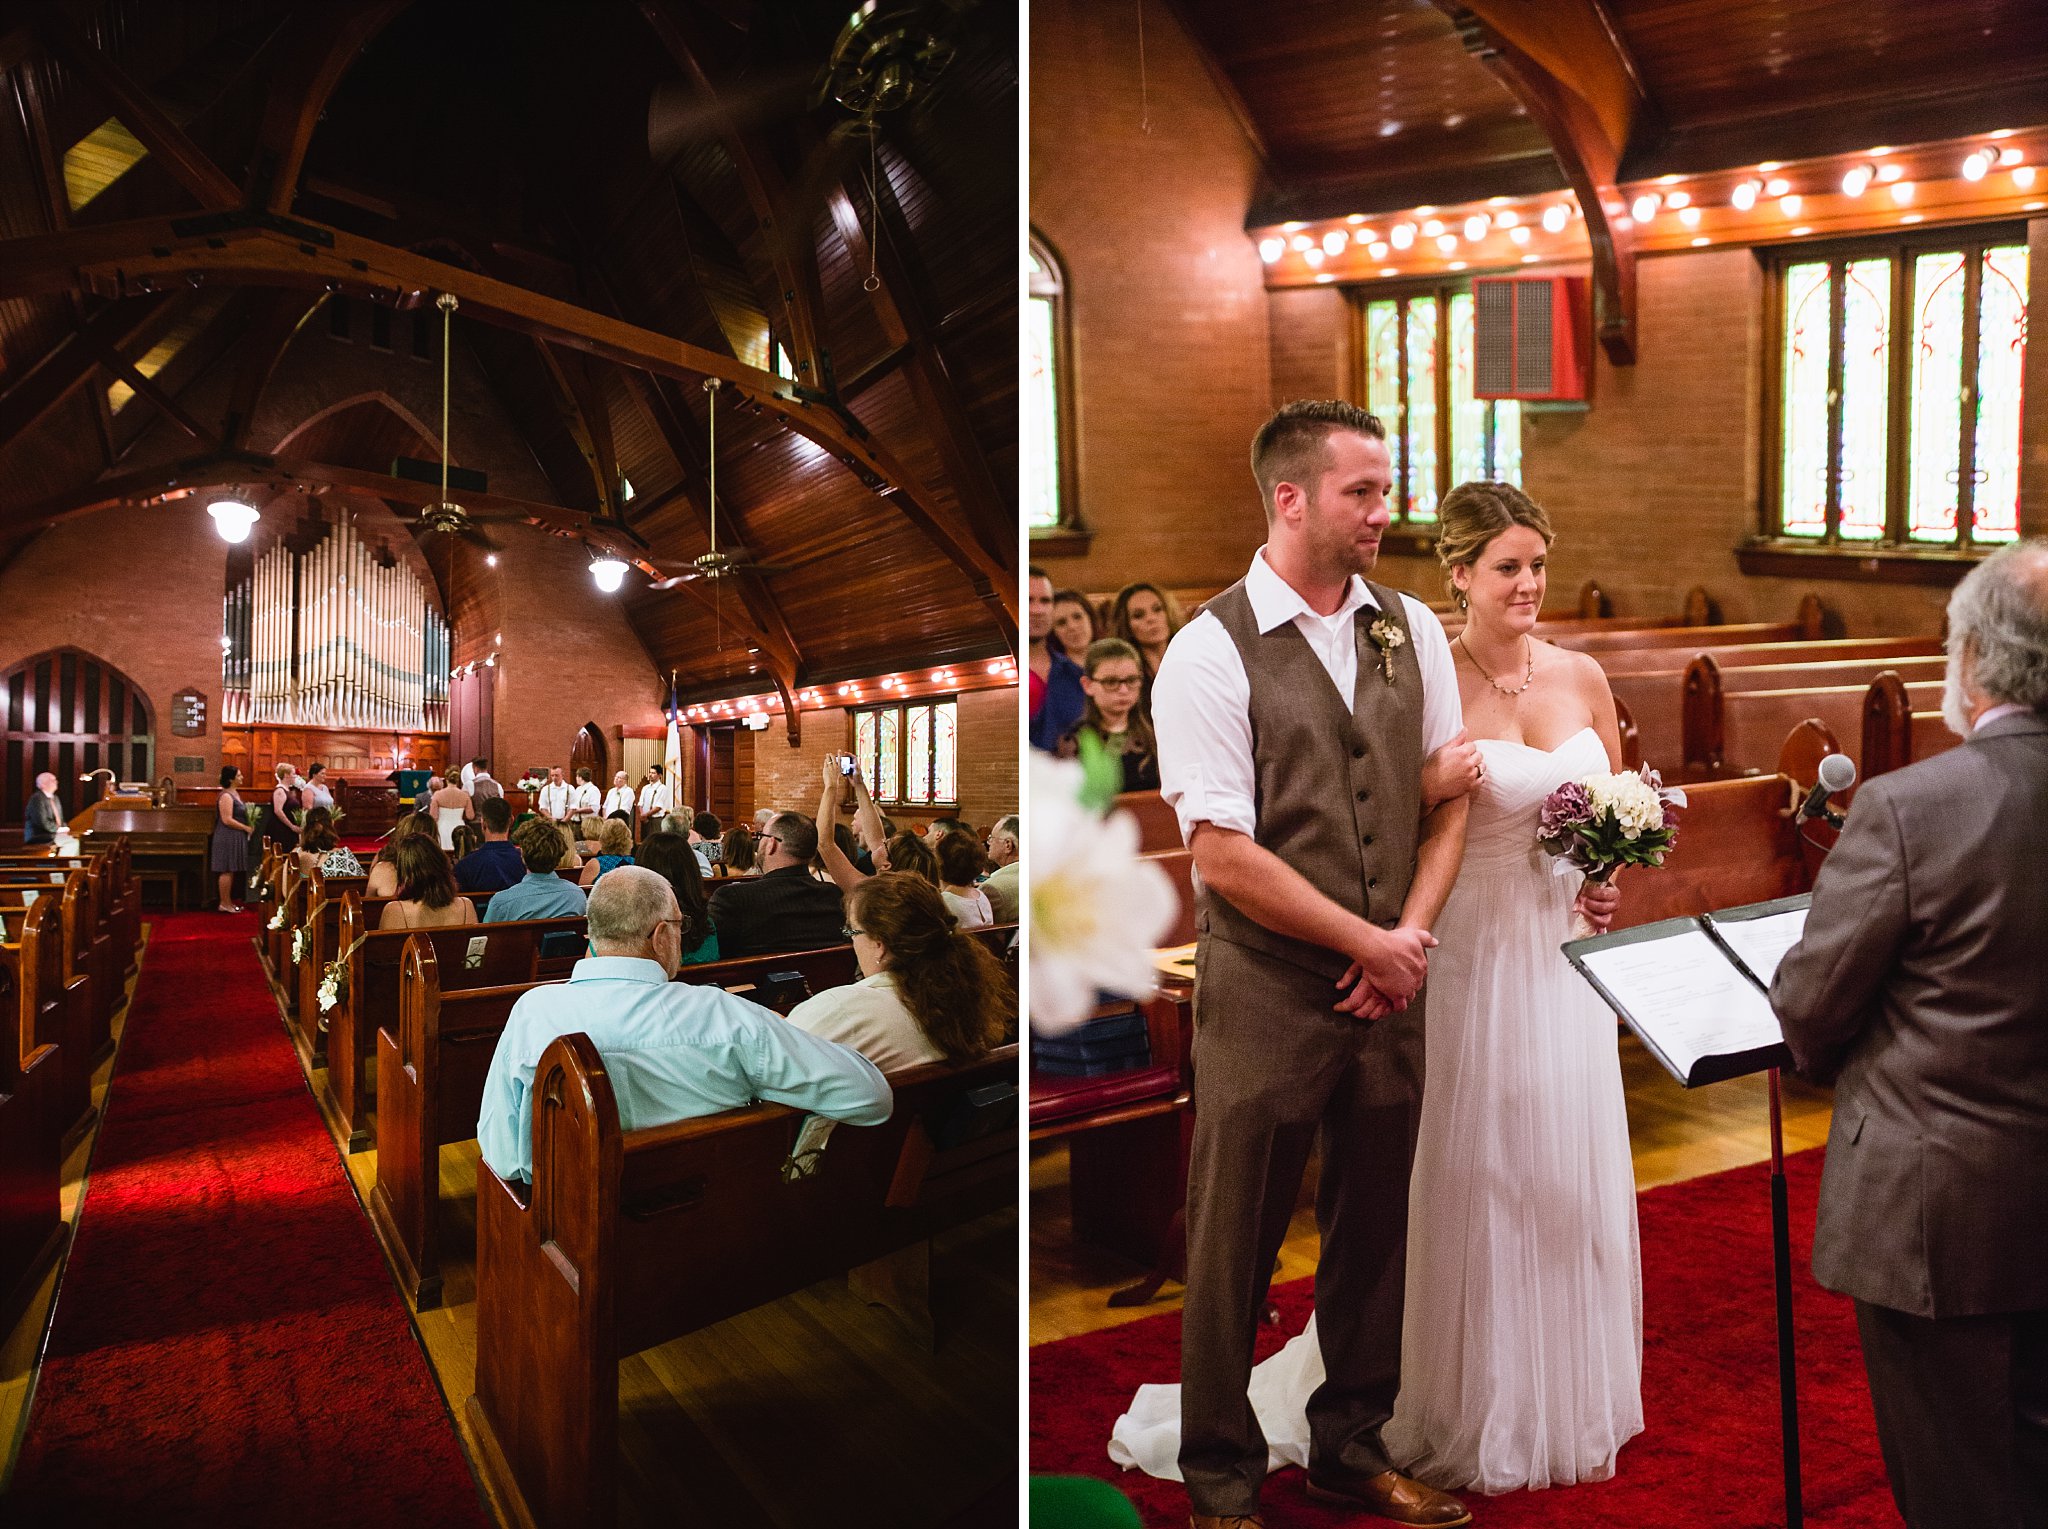 Wedding in a 200 year hold historic church in Bisbee Arizona by PMA Photography